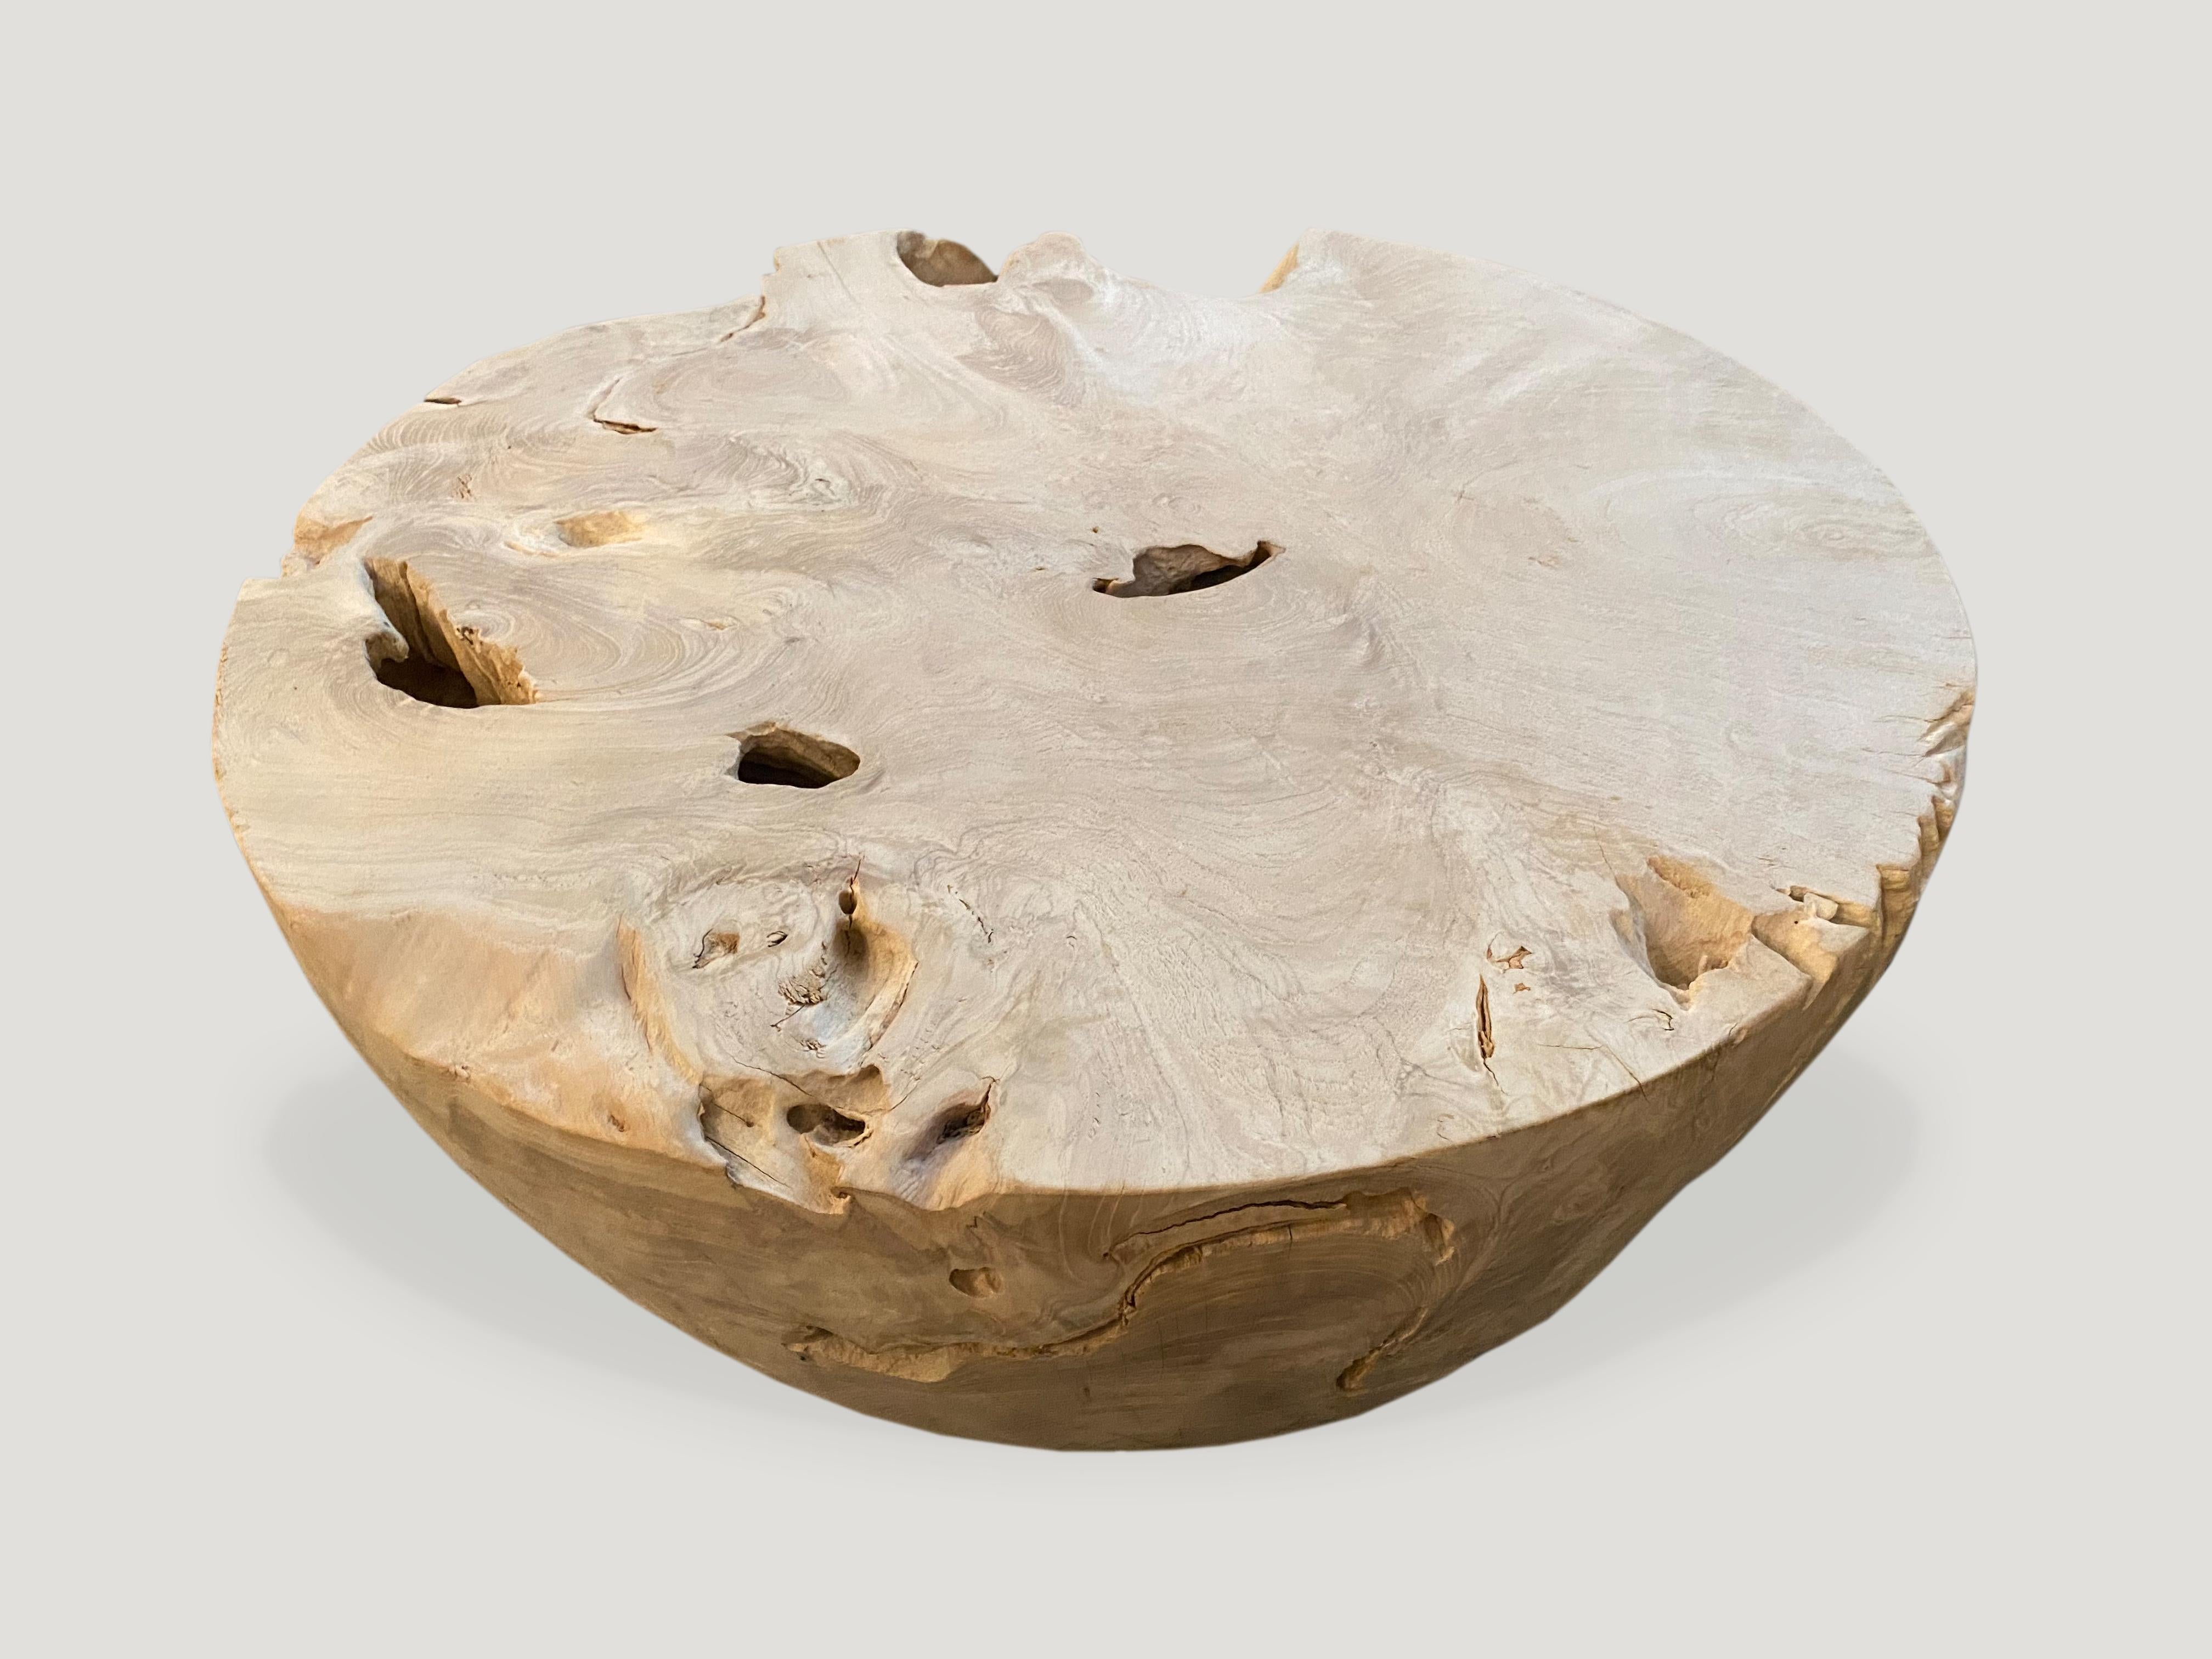 Organic reclaimed round teak coffee table, bleached with a light white washed finish. Perfect for inside or outside living. We can also produce this shape charred or natural teak. 

The St. Barts Collection features an exciting new line of organic